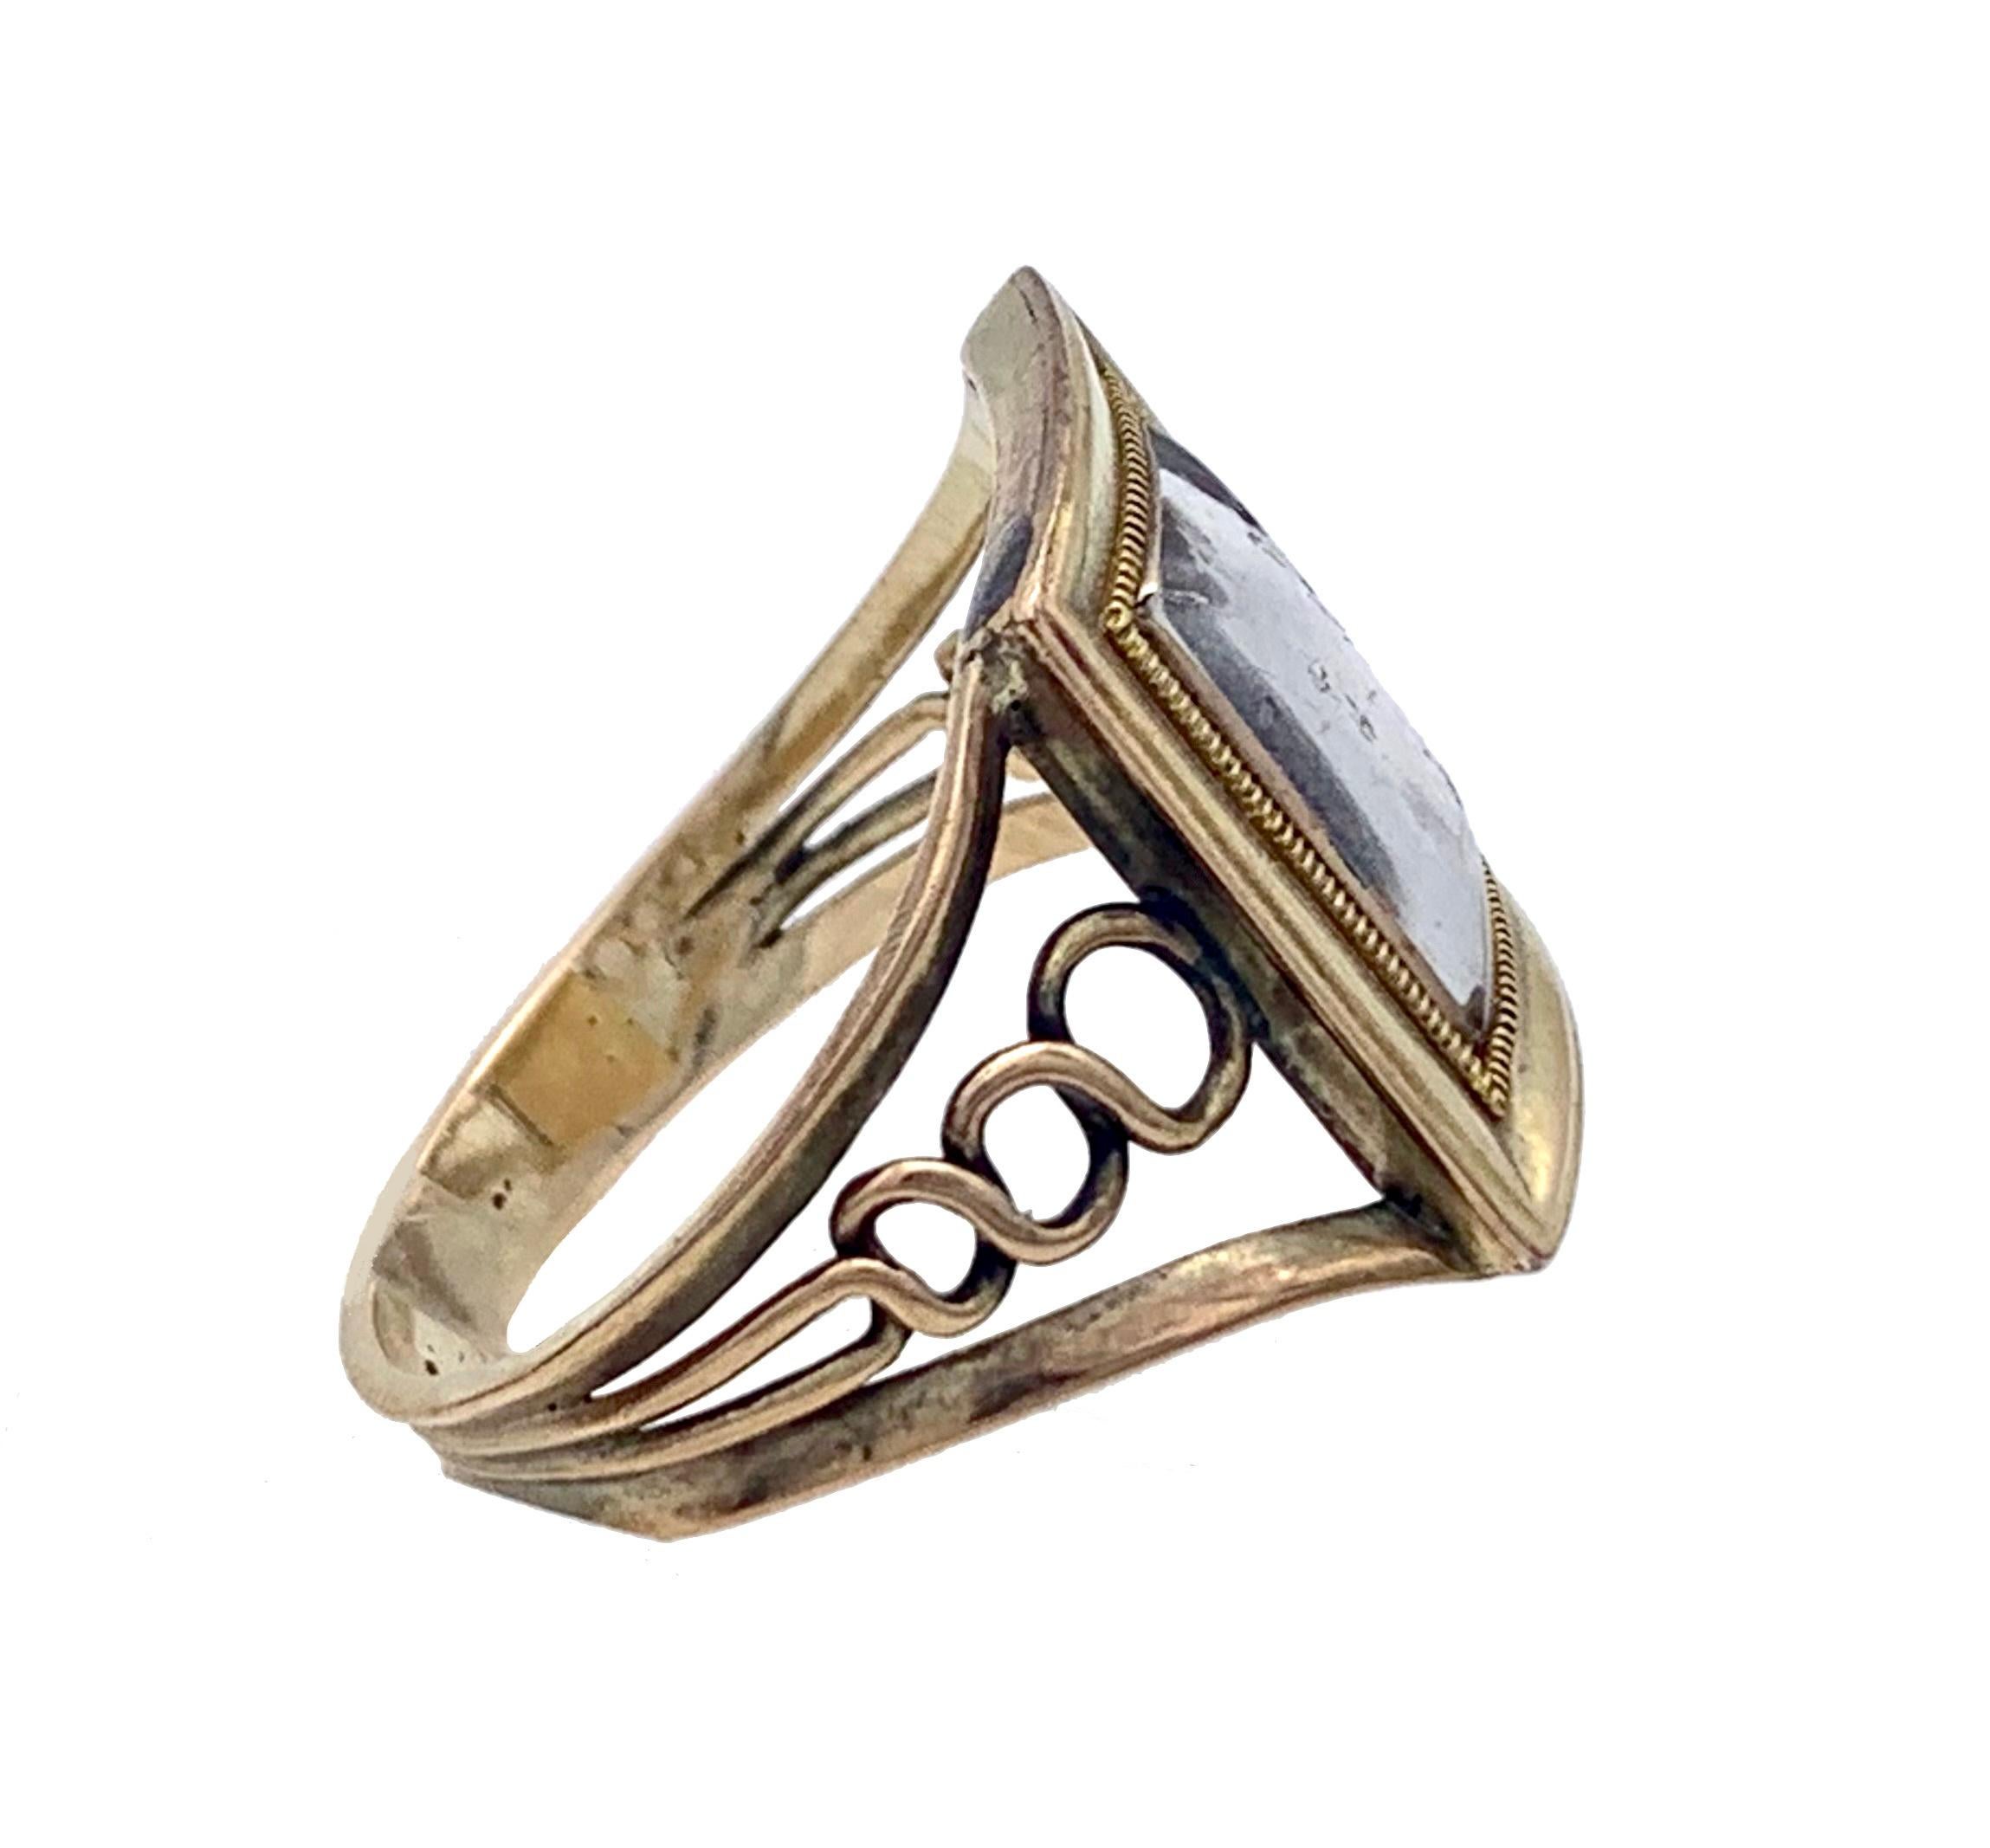 This unusual shaped gold ring wast created out of 9 karat gold in the 1st decade of the nineteenth century, over 22o years ago..
Basing my judgement on rings of this period with almost identical shanks carriing a dated inscription, I dare narrow